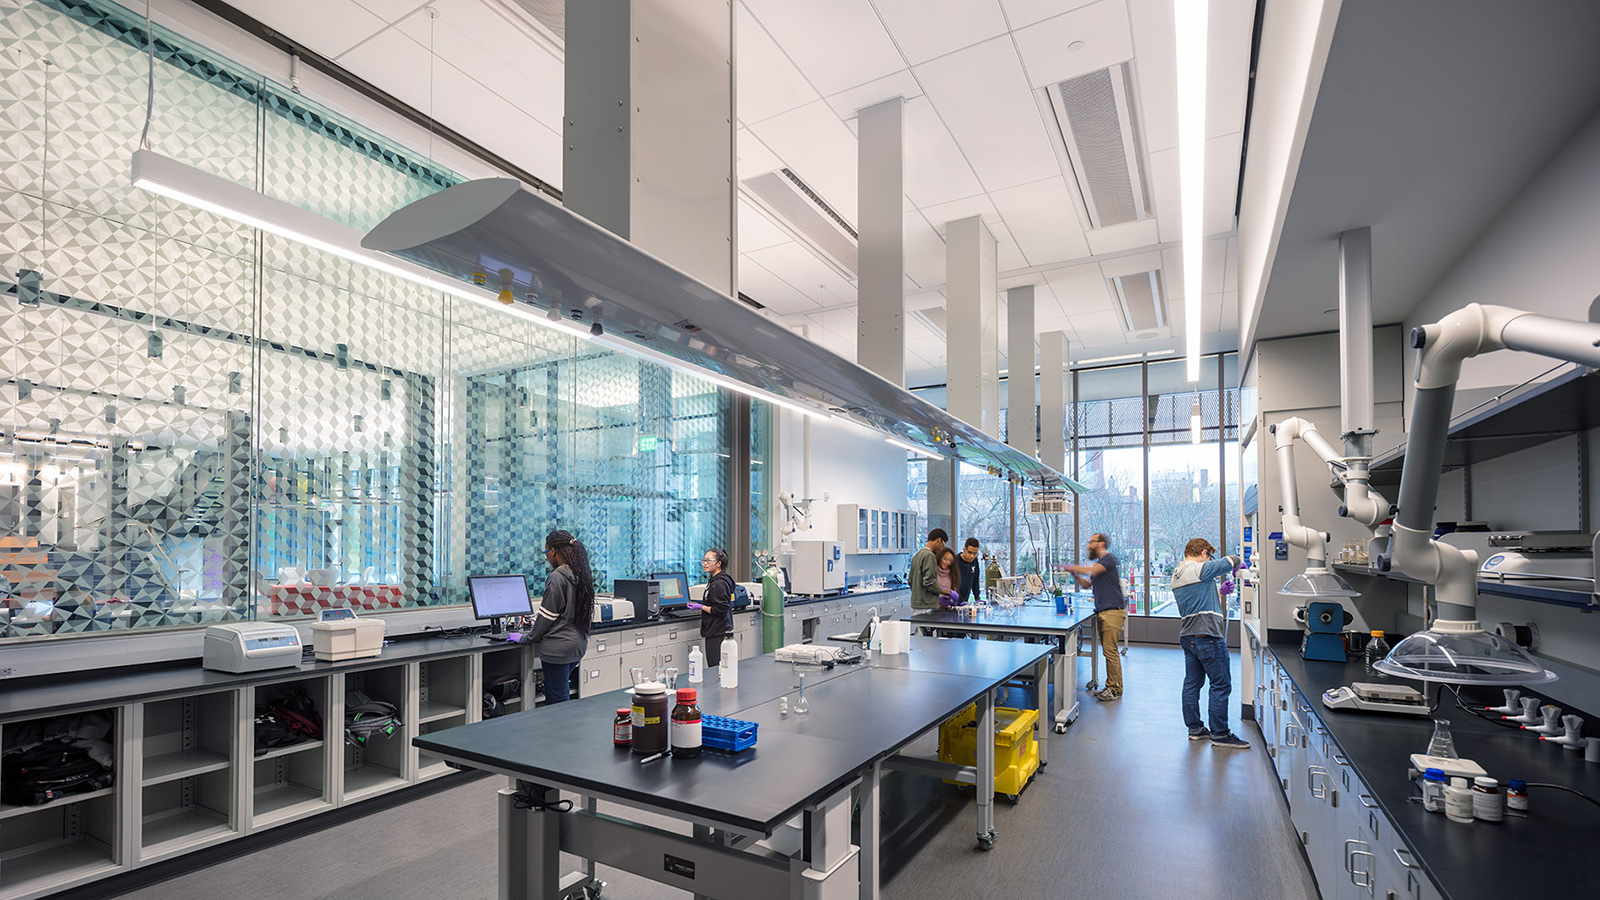 Brown University Engineering Research Center Interior, chemistry teaching lab